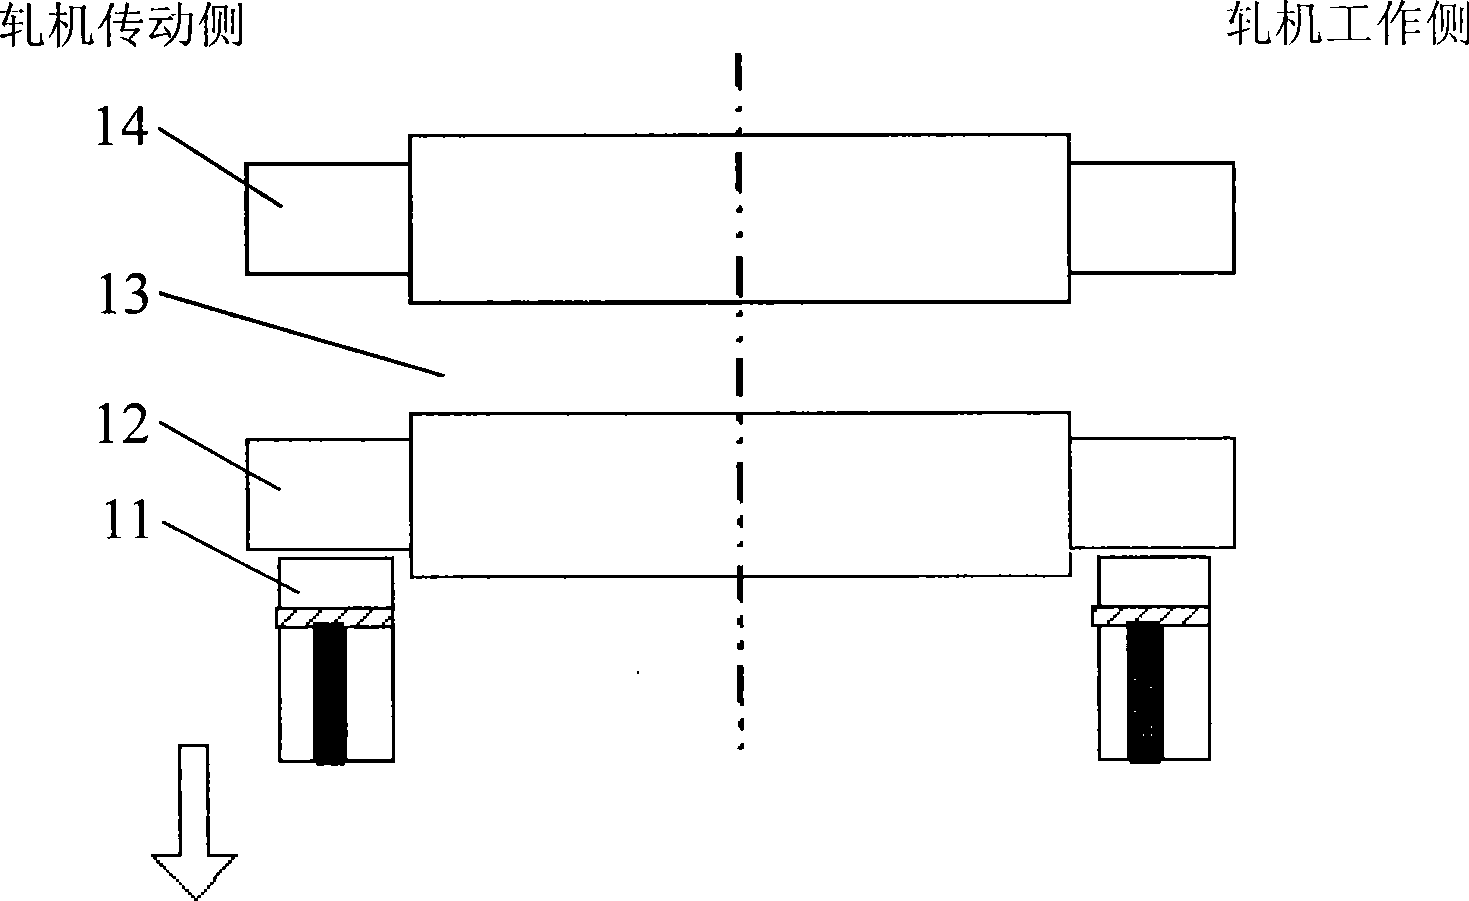 Method for correcting error of middle blank for pass-reversible rolling